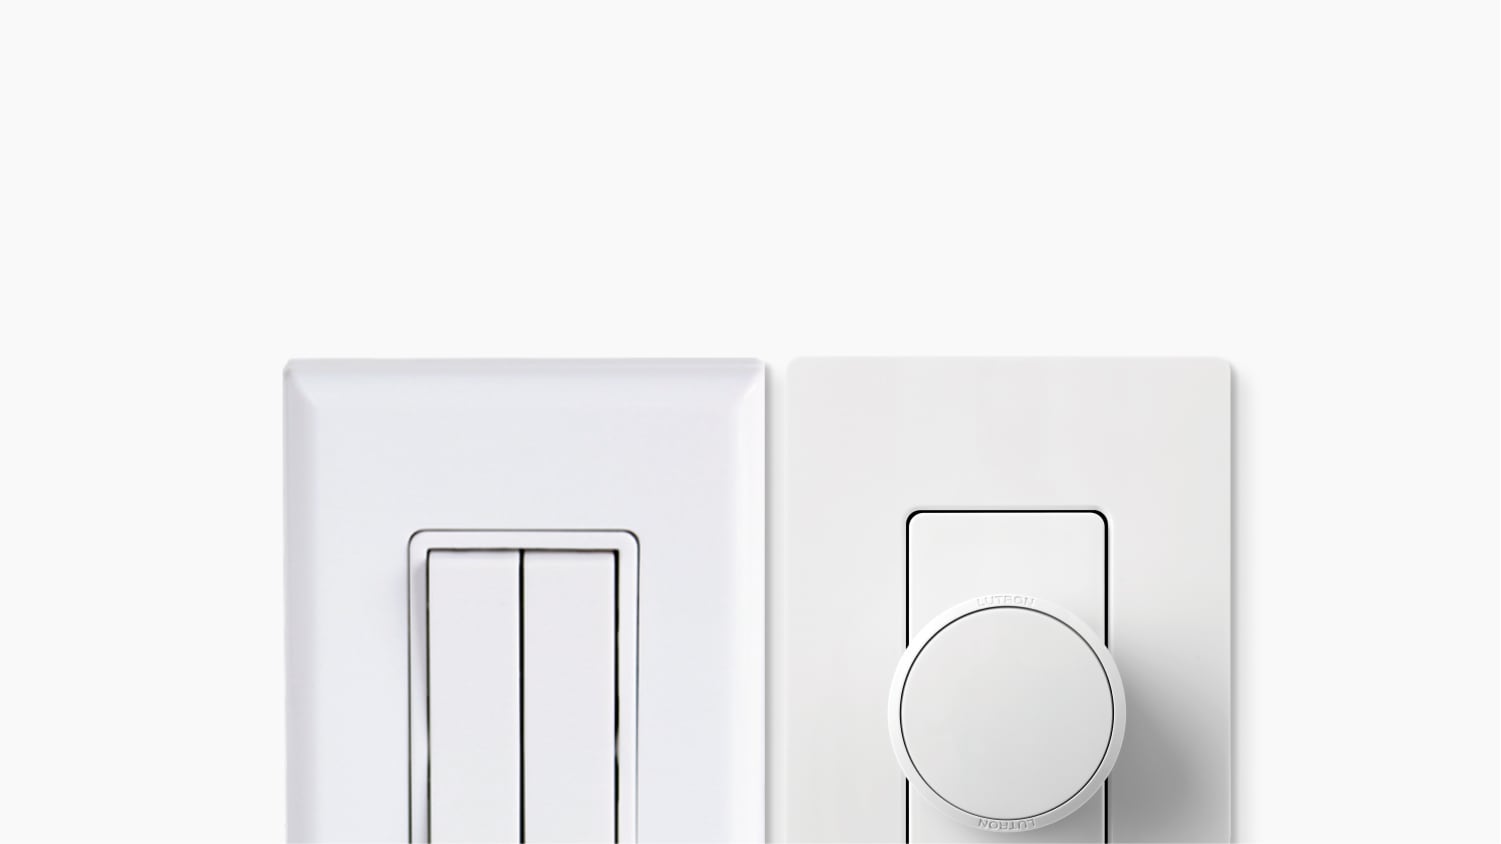 https://www.philips-hue.com/content/dam/hue/masters/explore-hue/works-with/smart-switches/smart-switches_fallback_16-9.jpg